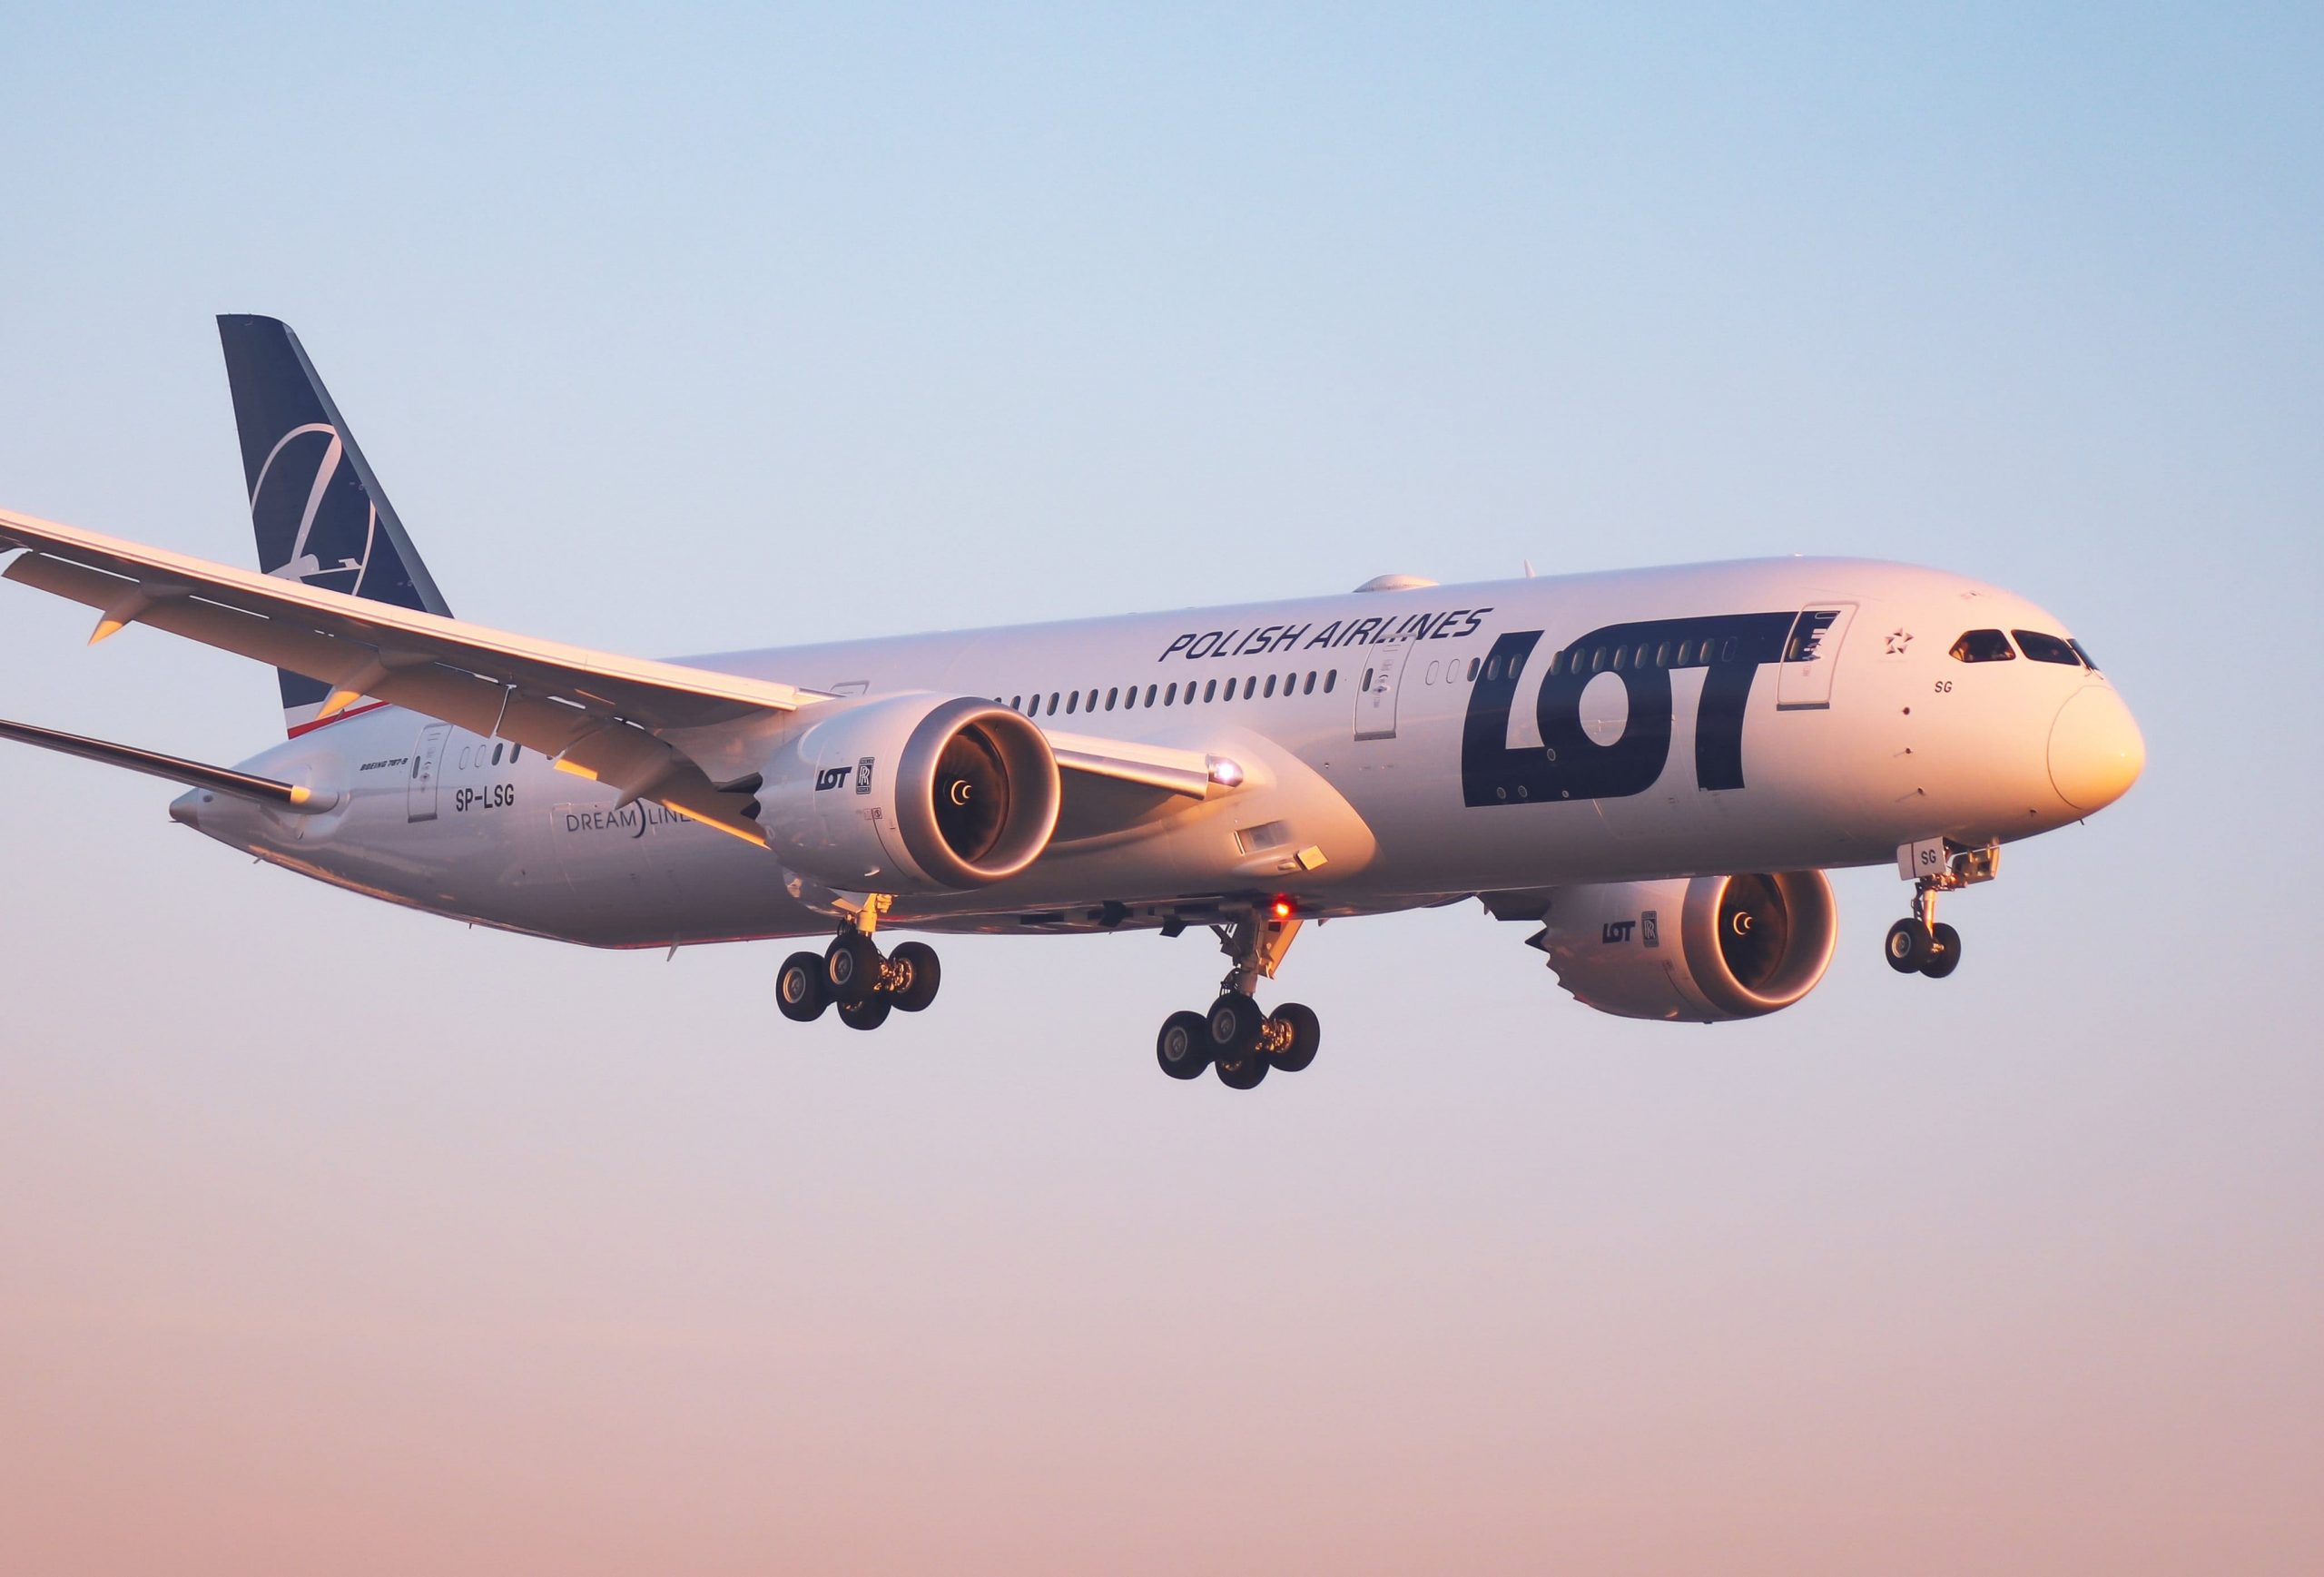 LOT Airlines